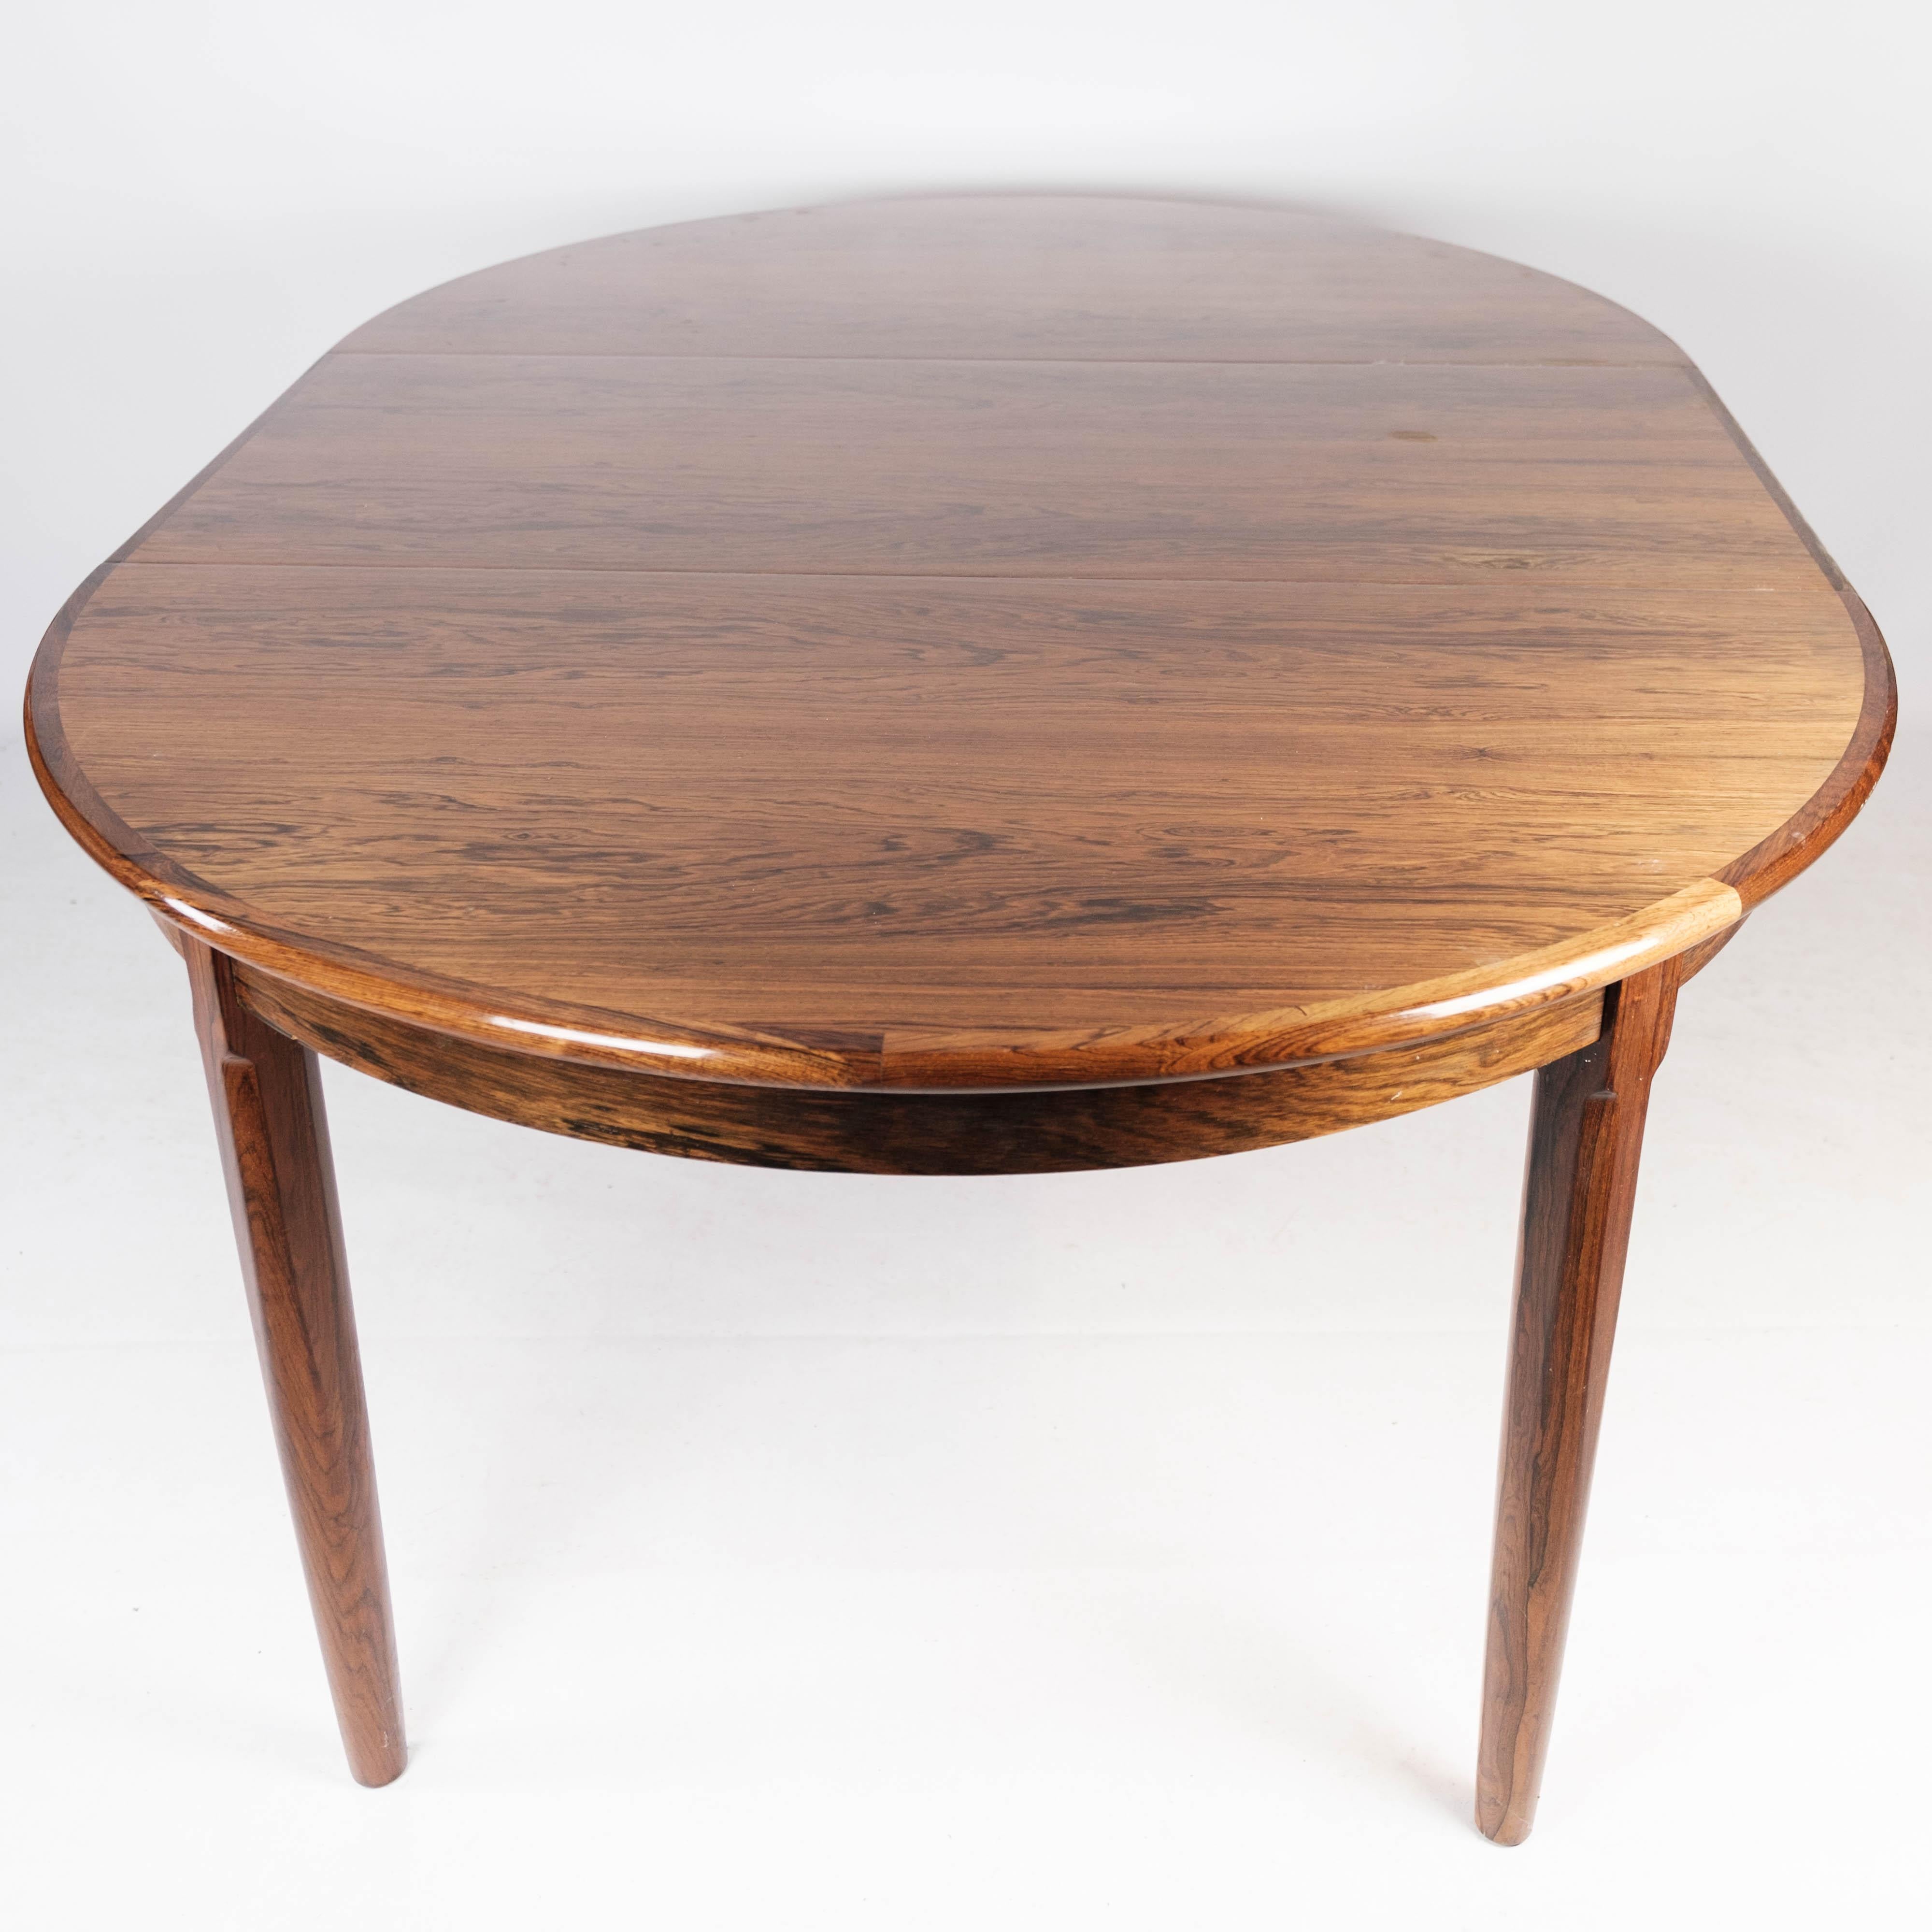 Dining Table Made In Rosewood With Extension, Danish Design From 1960s For Sale 10